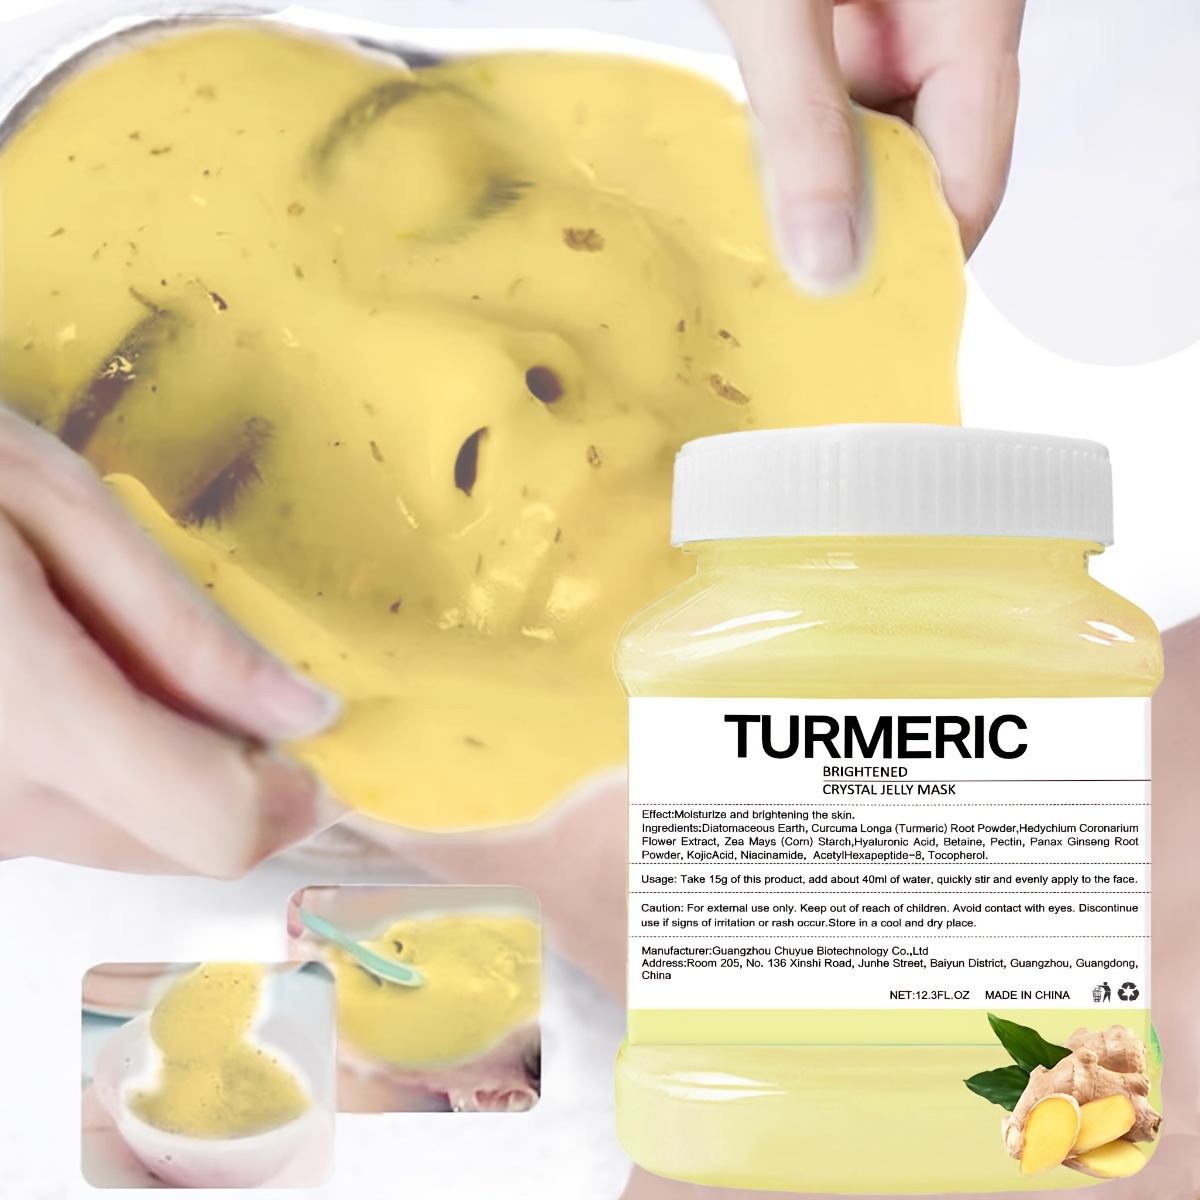 

12.3fl.oz Turmeric Jelly Face Mask For Facial Skin Care, Natural Gel Hydro Face Masks, Peel Off Hydro Jelly Mask, Moisturizing, Brightening Peel-off Gel Mask For All Skin Types